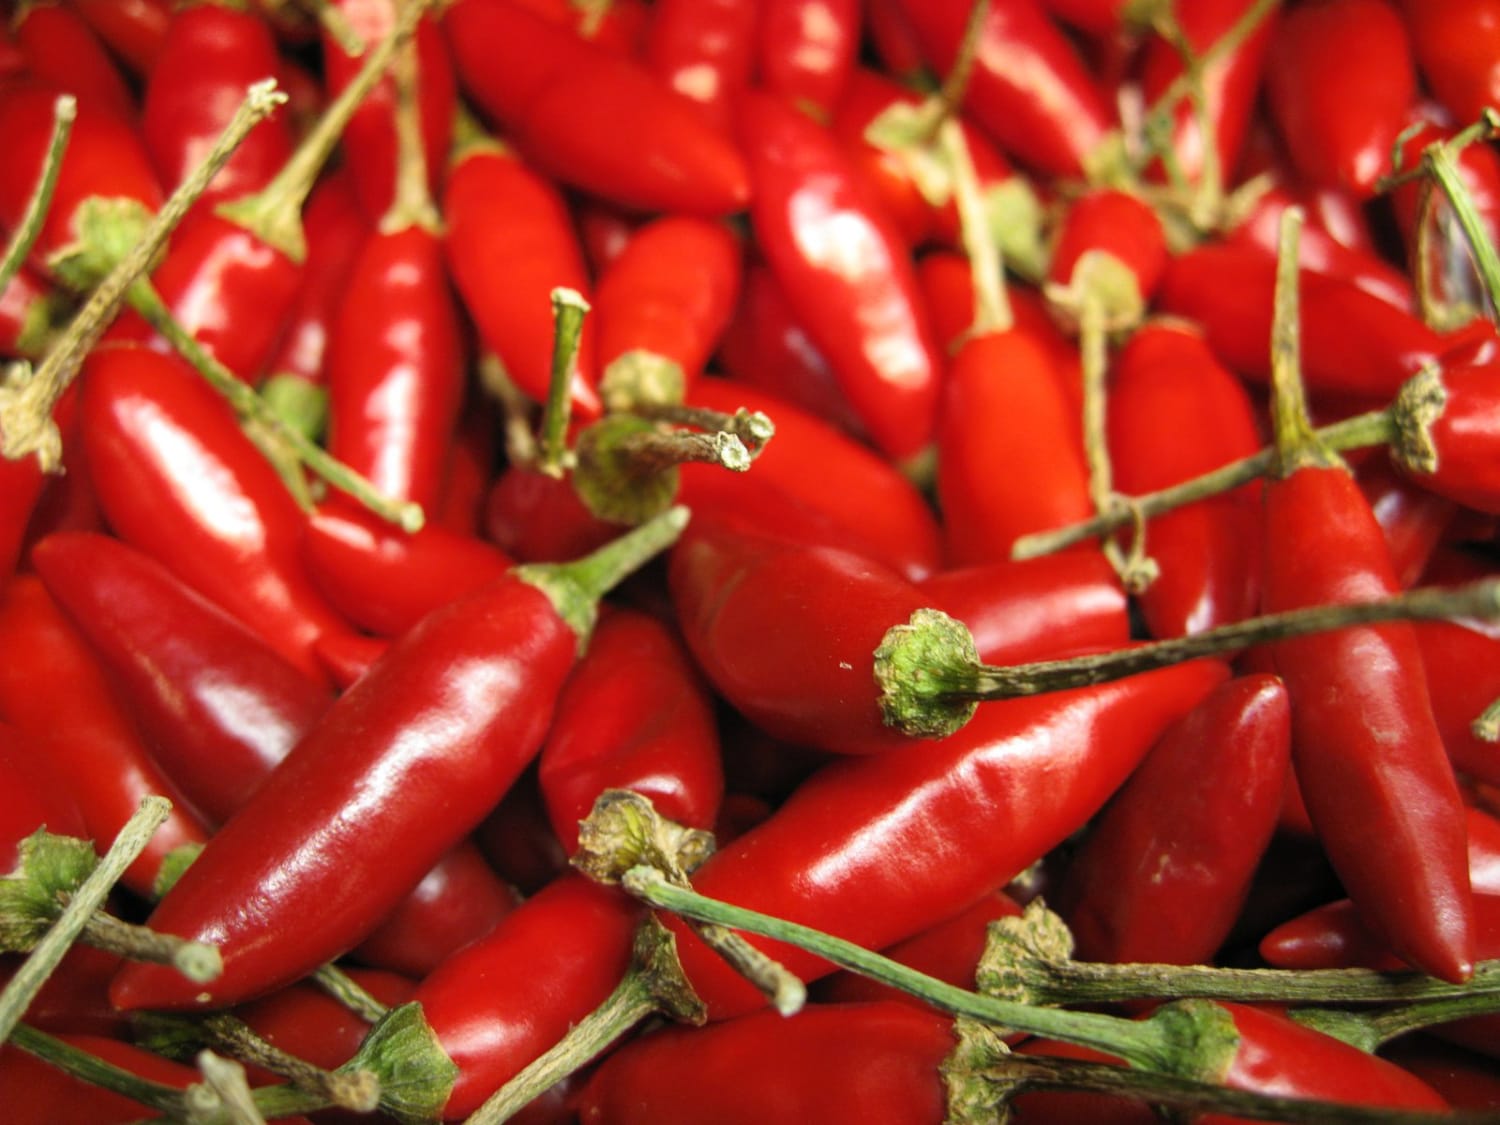 People in Mexico Were Using Chili Peppers to Make Spicy Drinks 2400 Years Ago